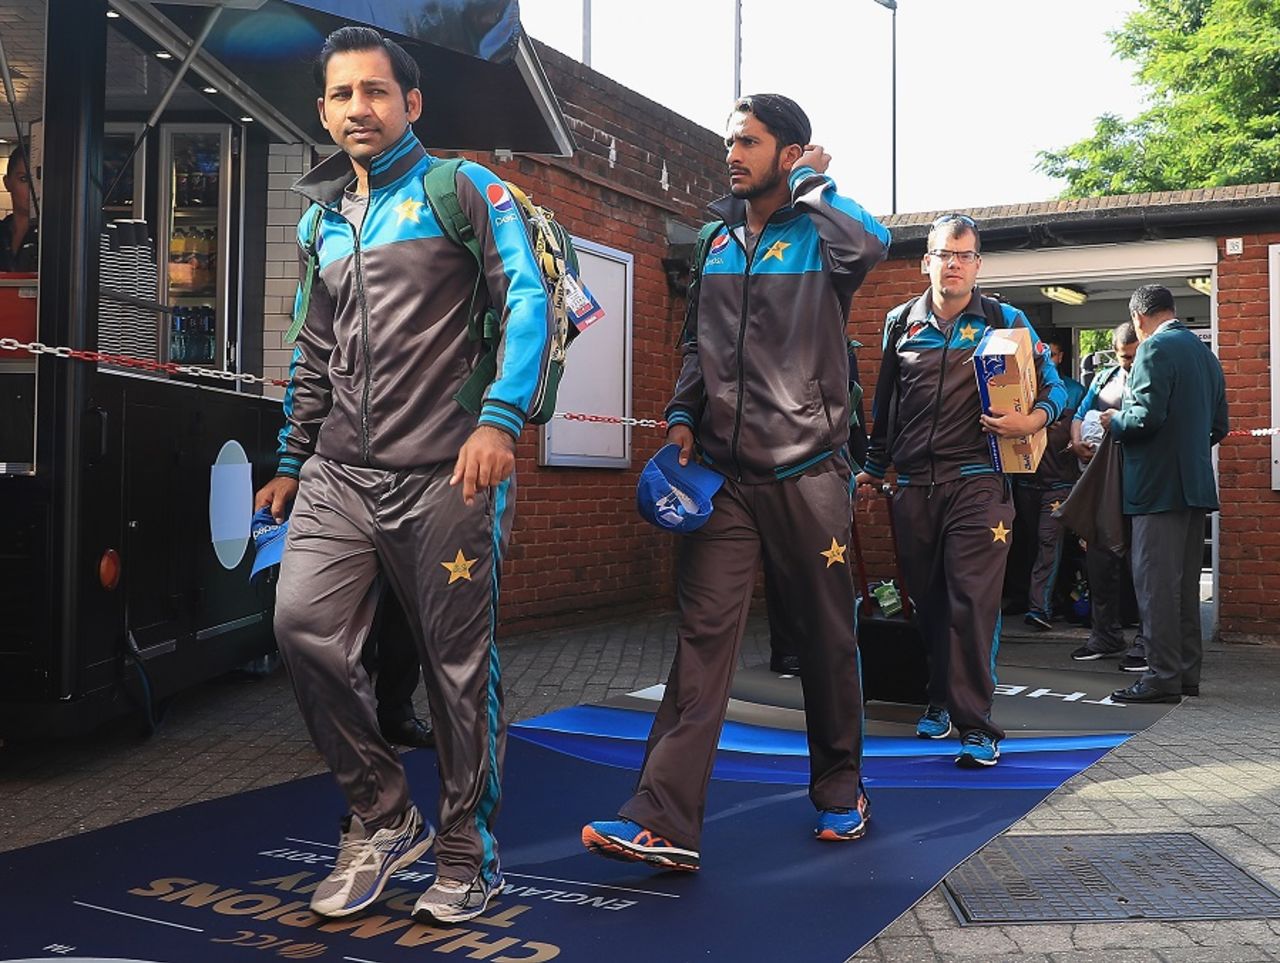 Sarfraz Ahmed and Hasan Ali step in to work, Final, Champions Trophy 2017, The Oval, London, June 18, 2017